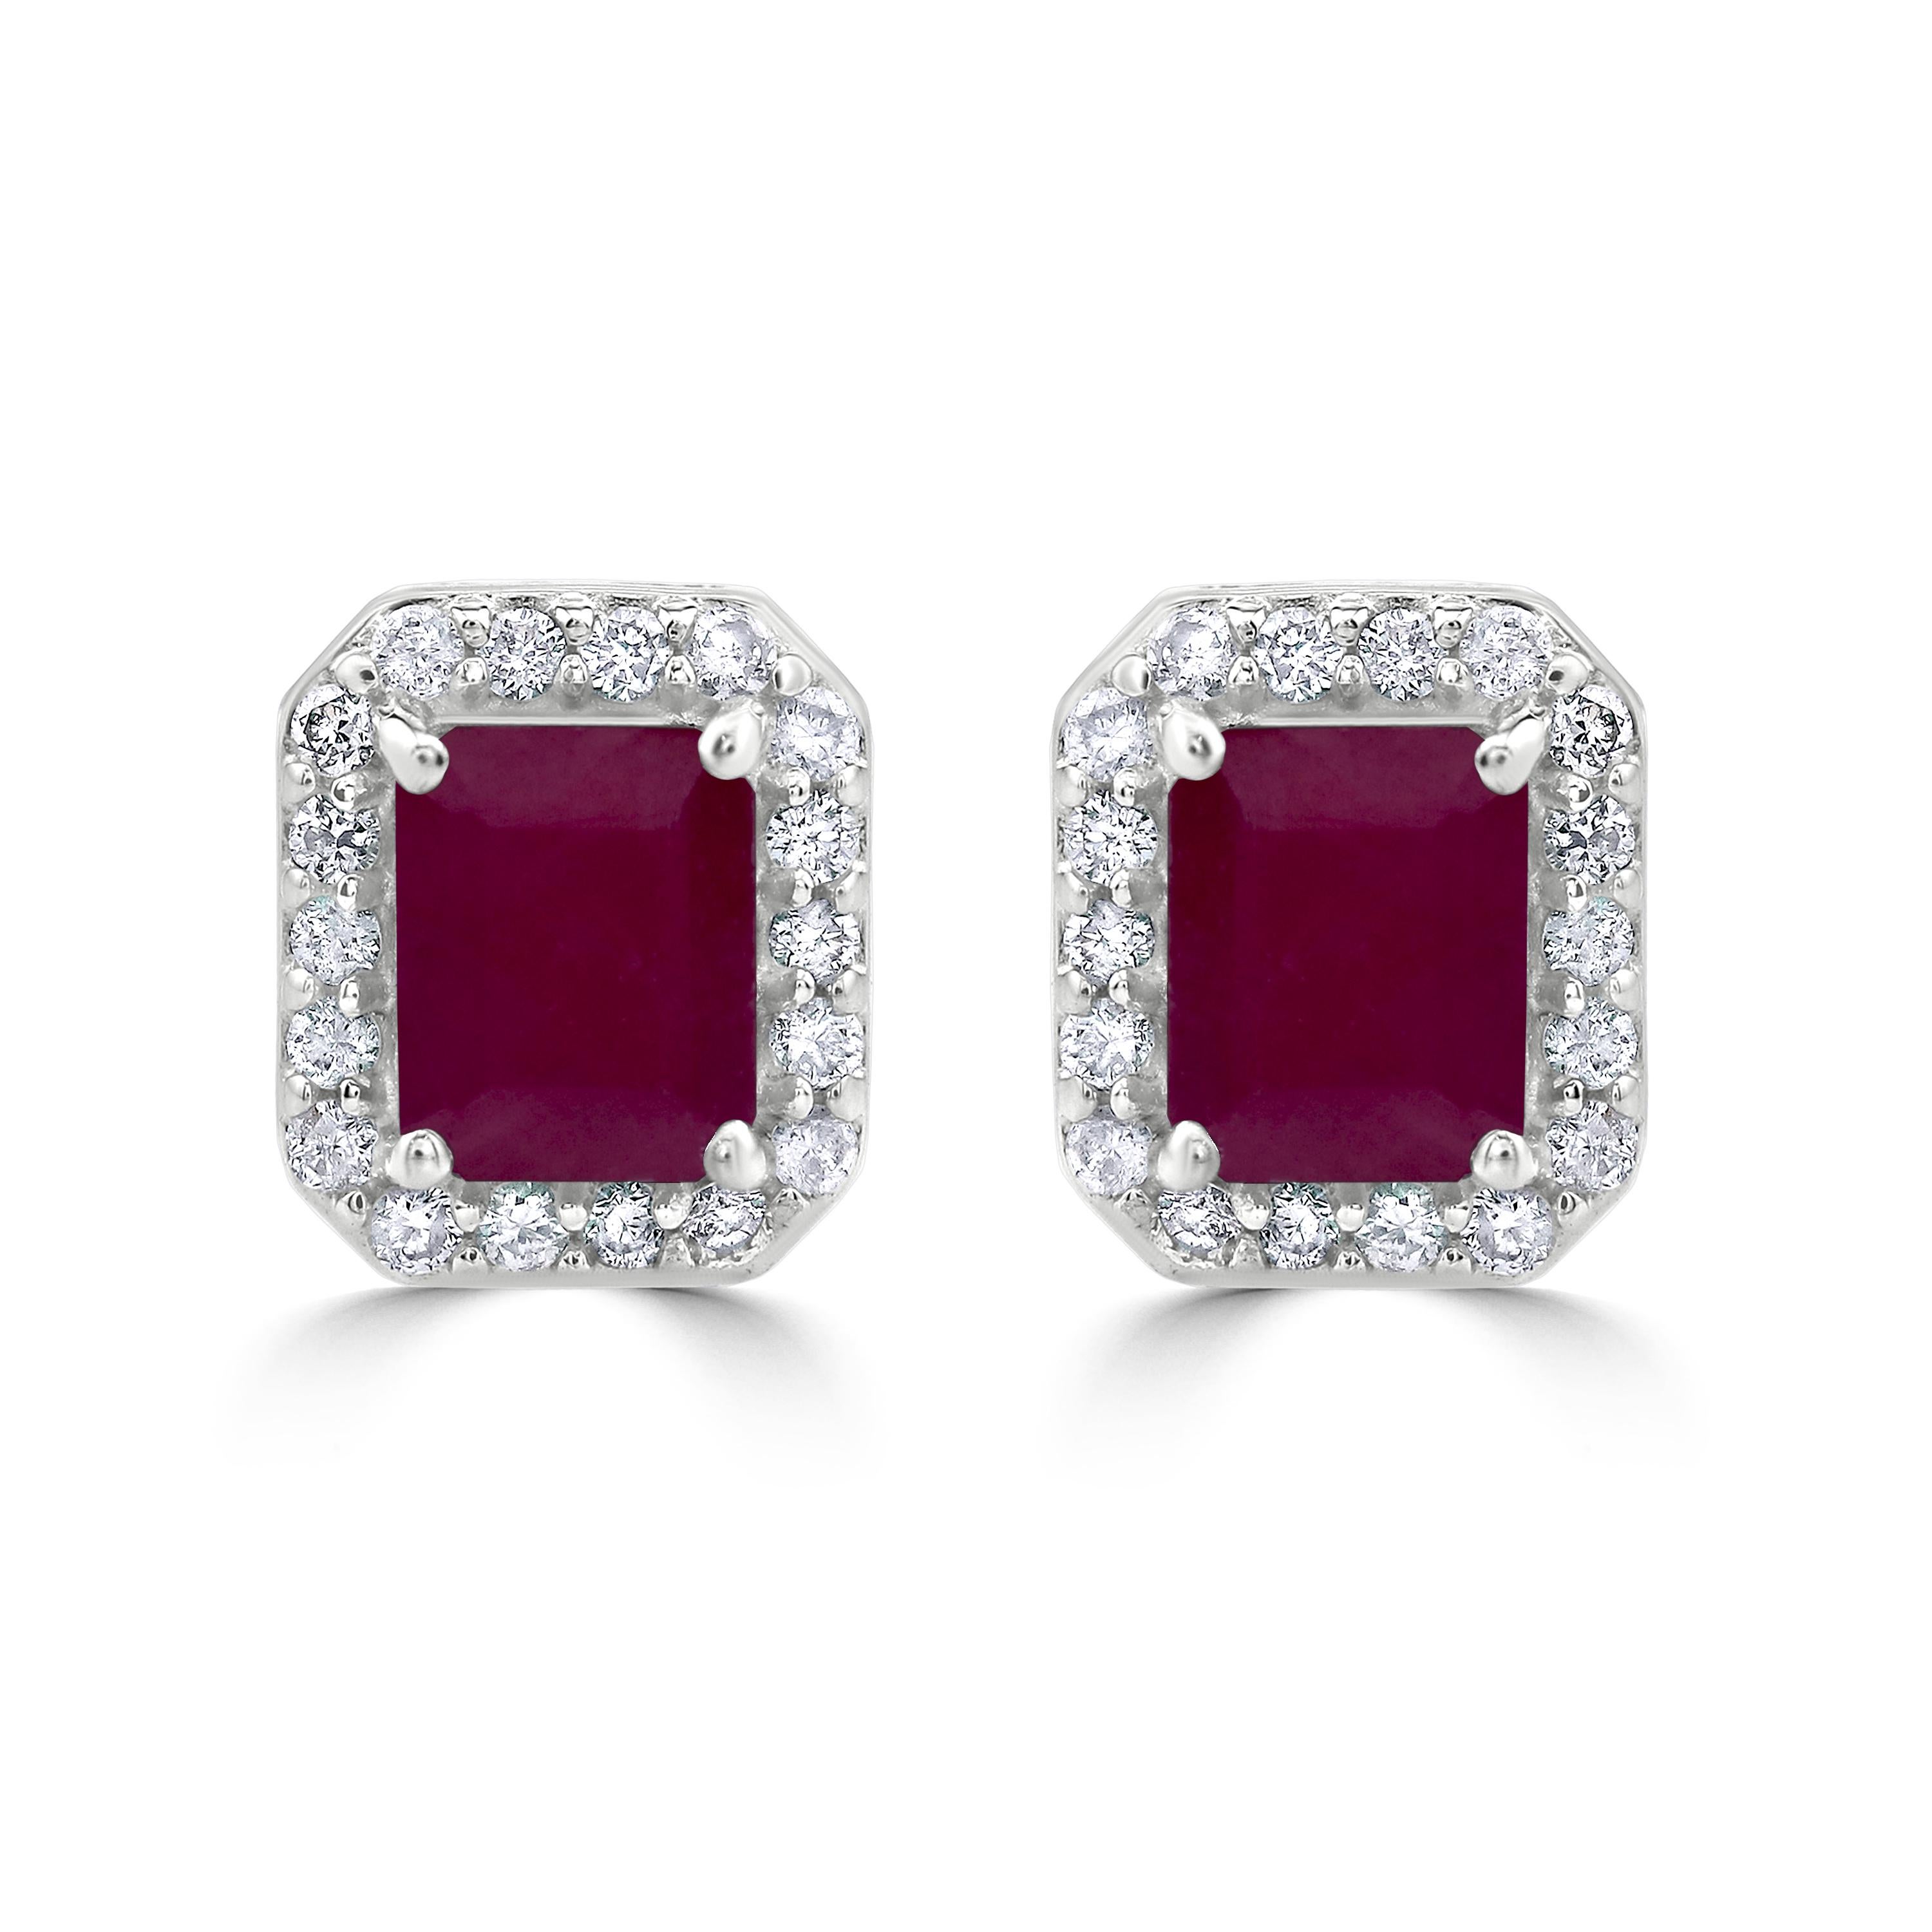 Octagon Cut Gemistry 1.45 Carats Octagon Ruby Stud Earrings with Diamond in 14K White Gold For Sale